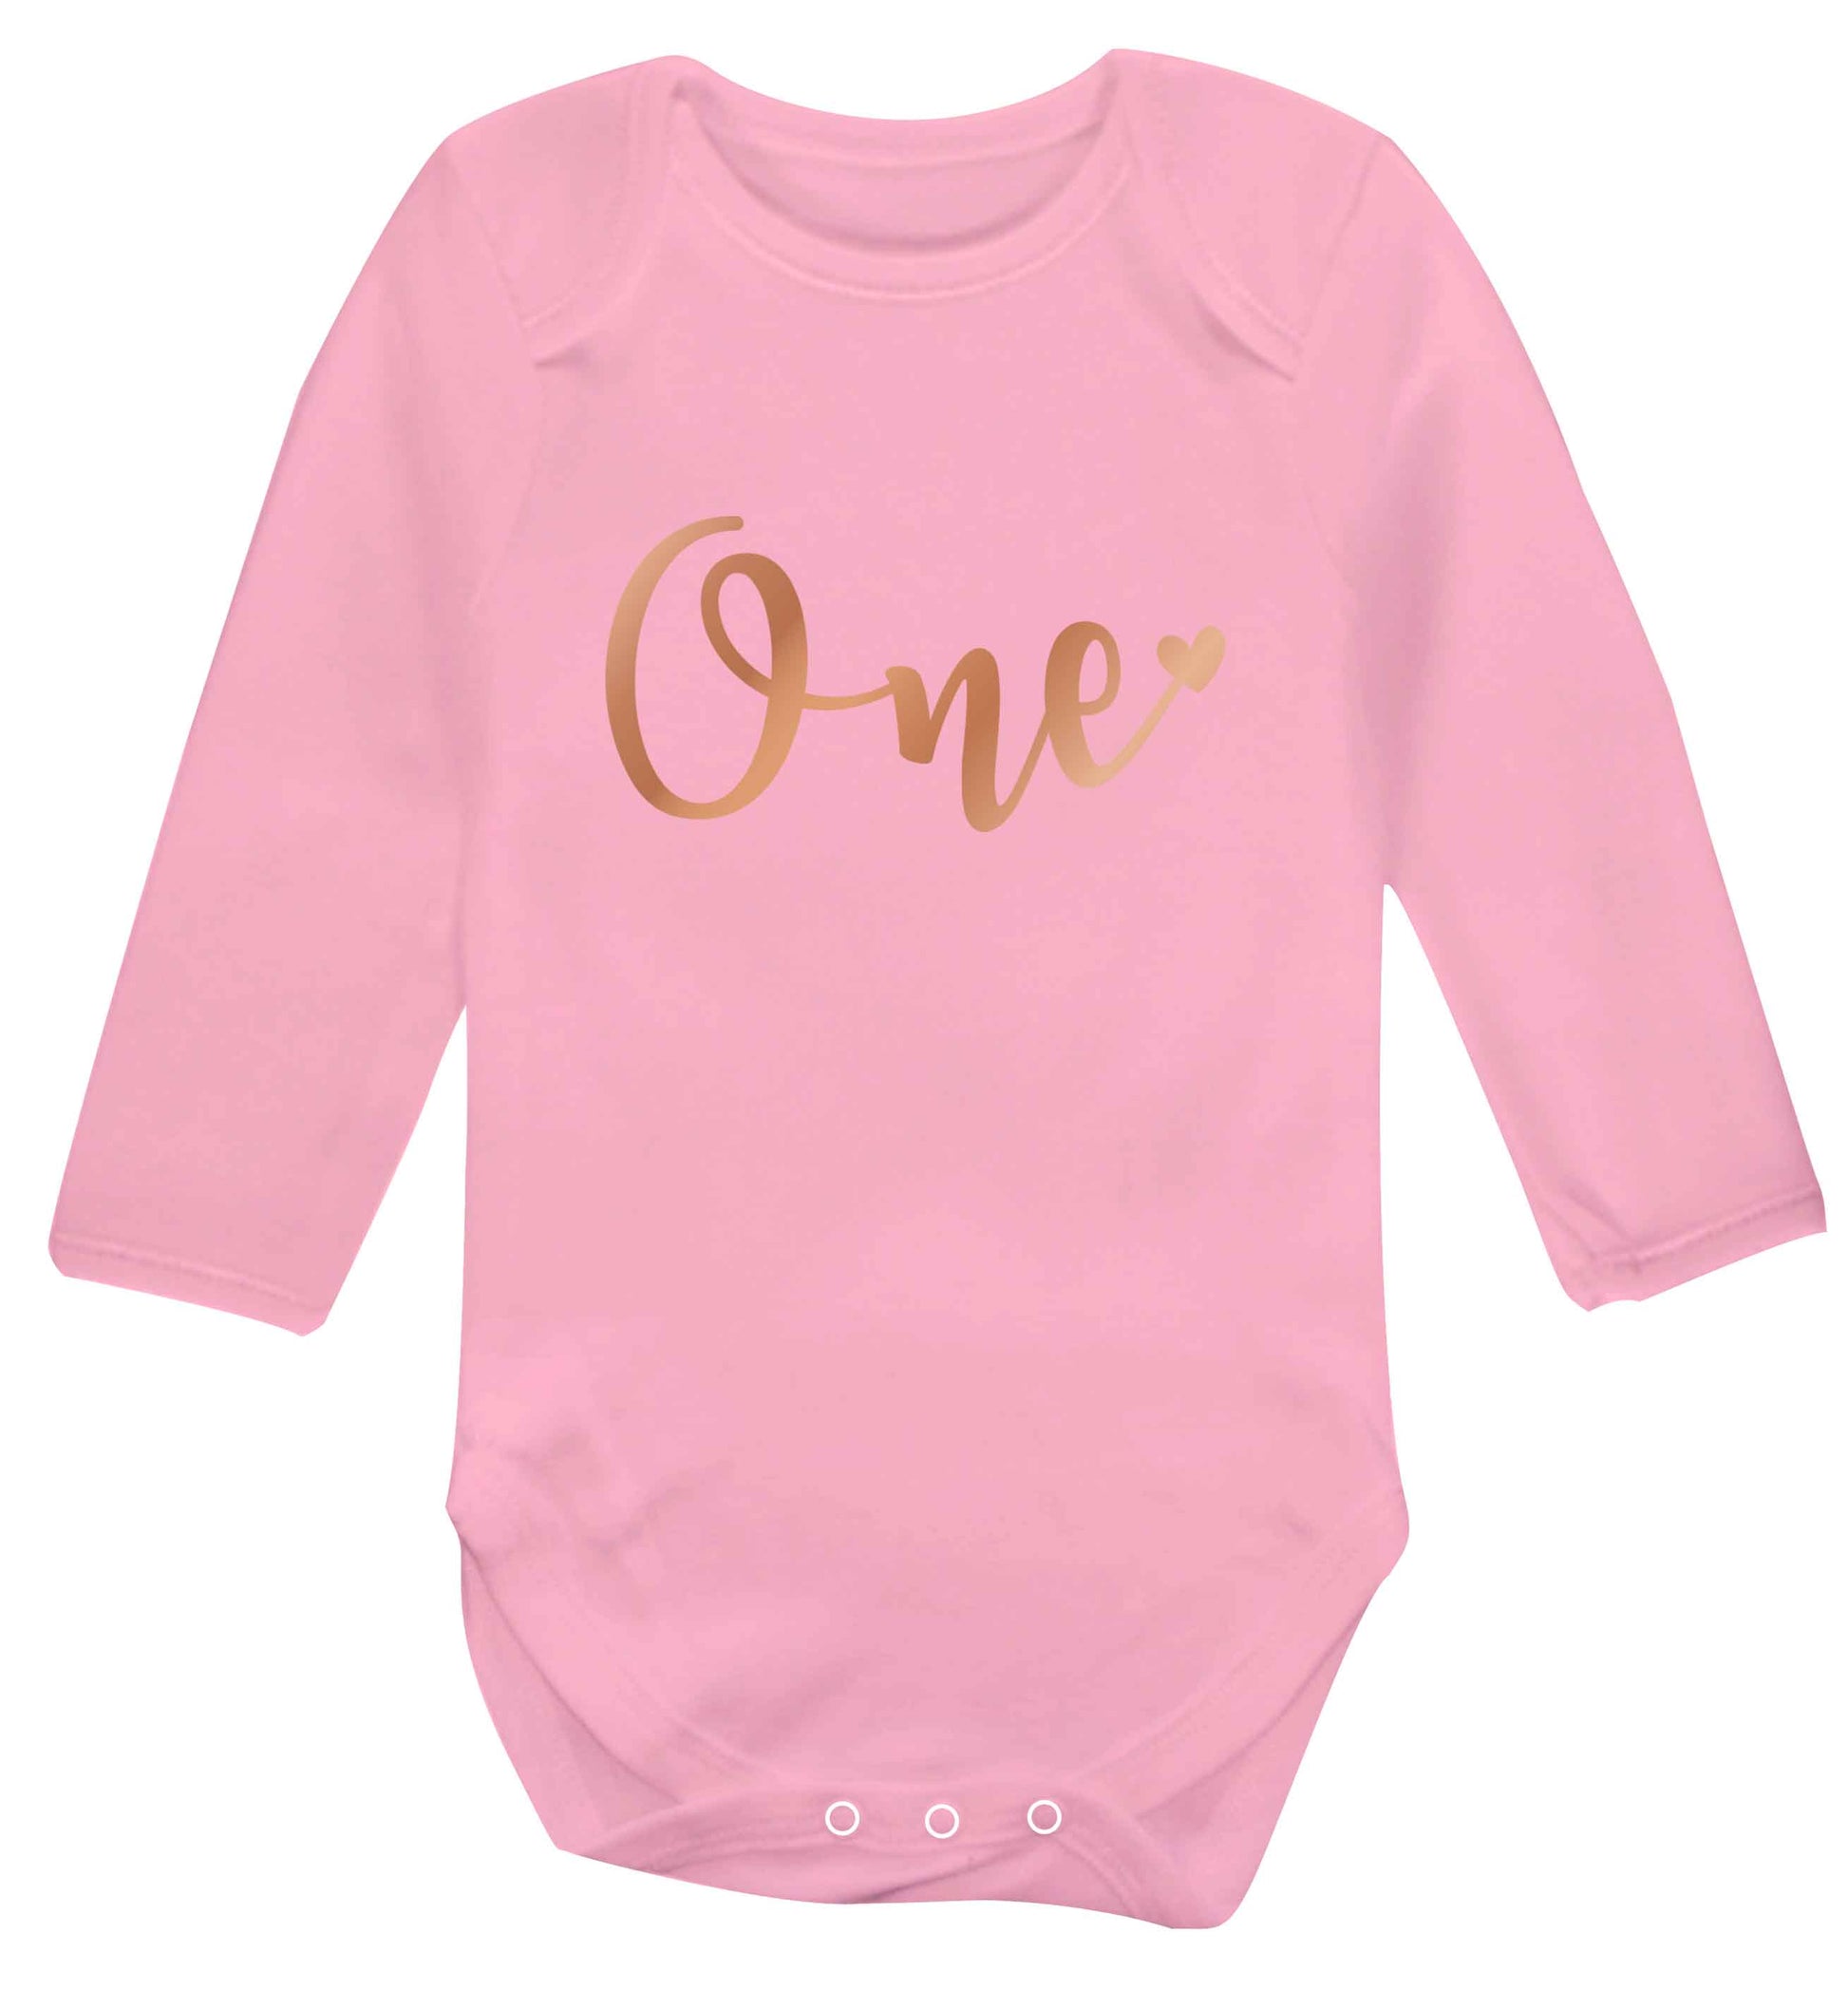 Rose Gold One baby vest long sleeved pale pink 6-12 months